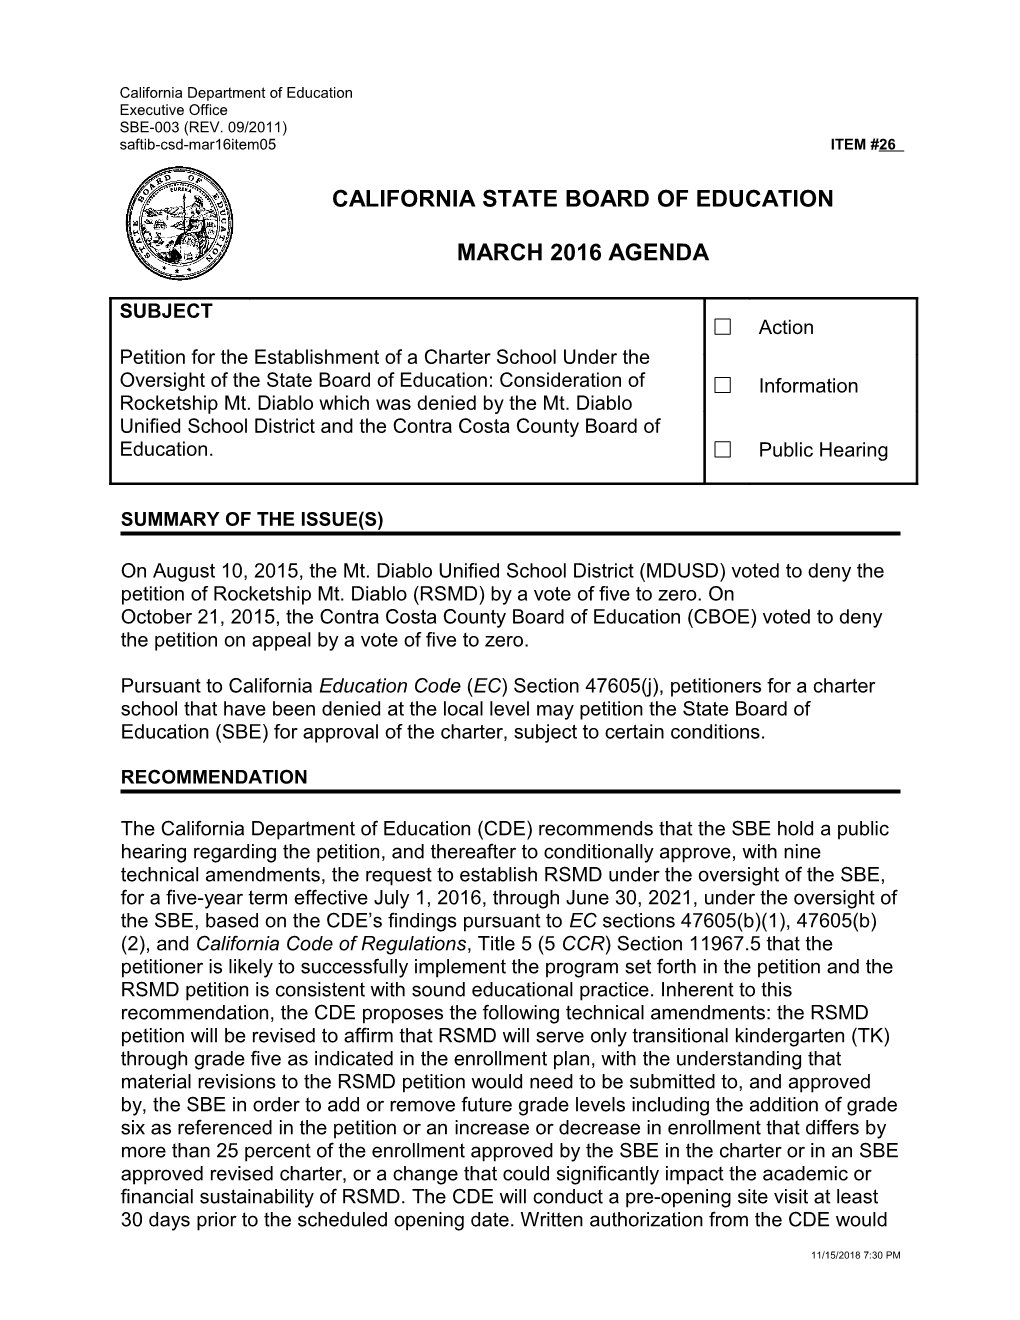 March 2016 Agenda Item 26 - Meeting Agendas (CA State Board of Education)